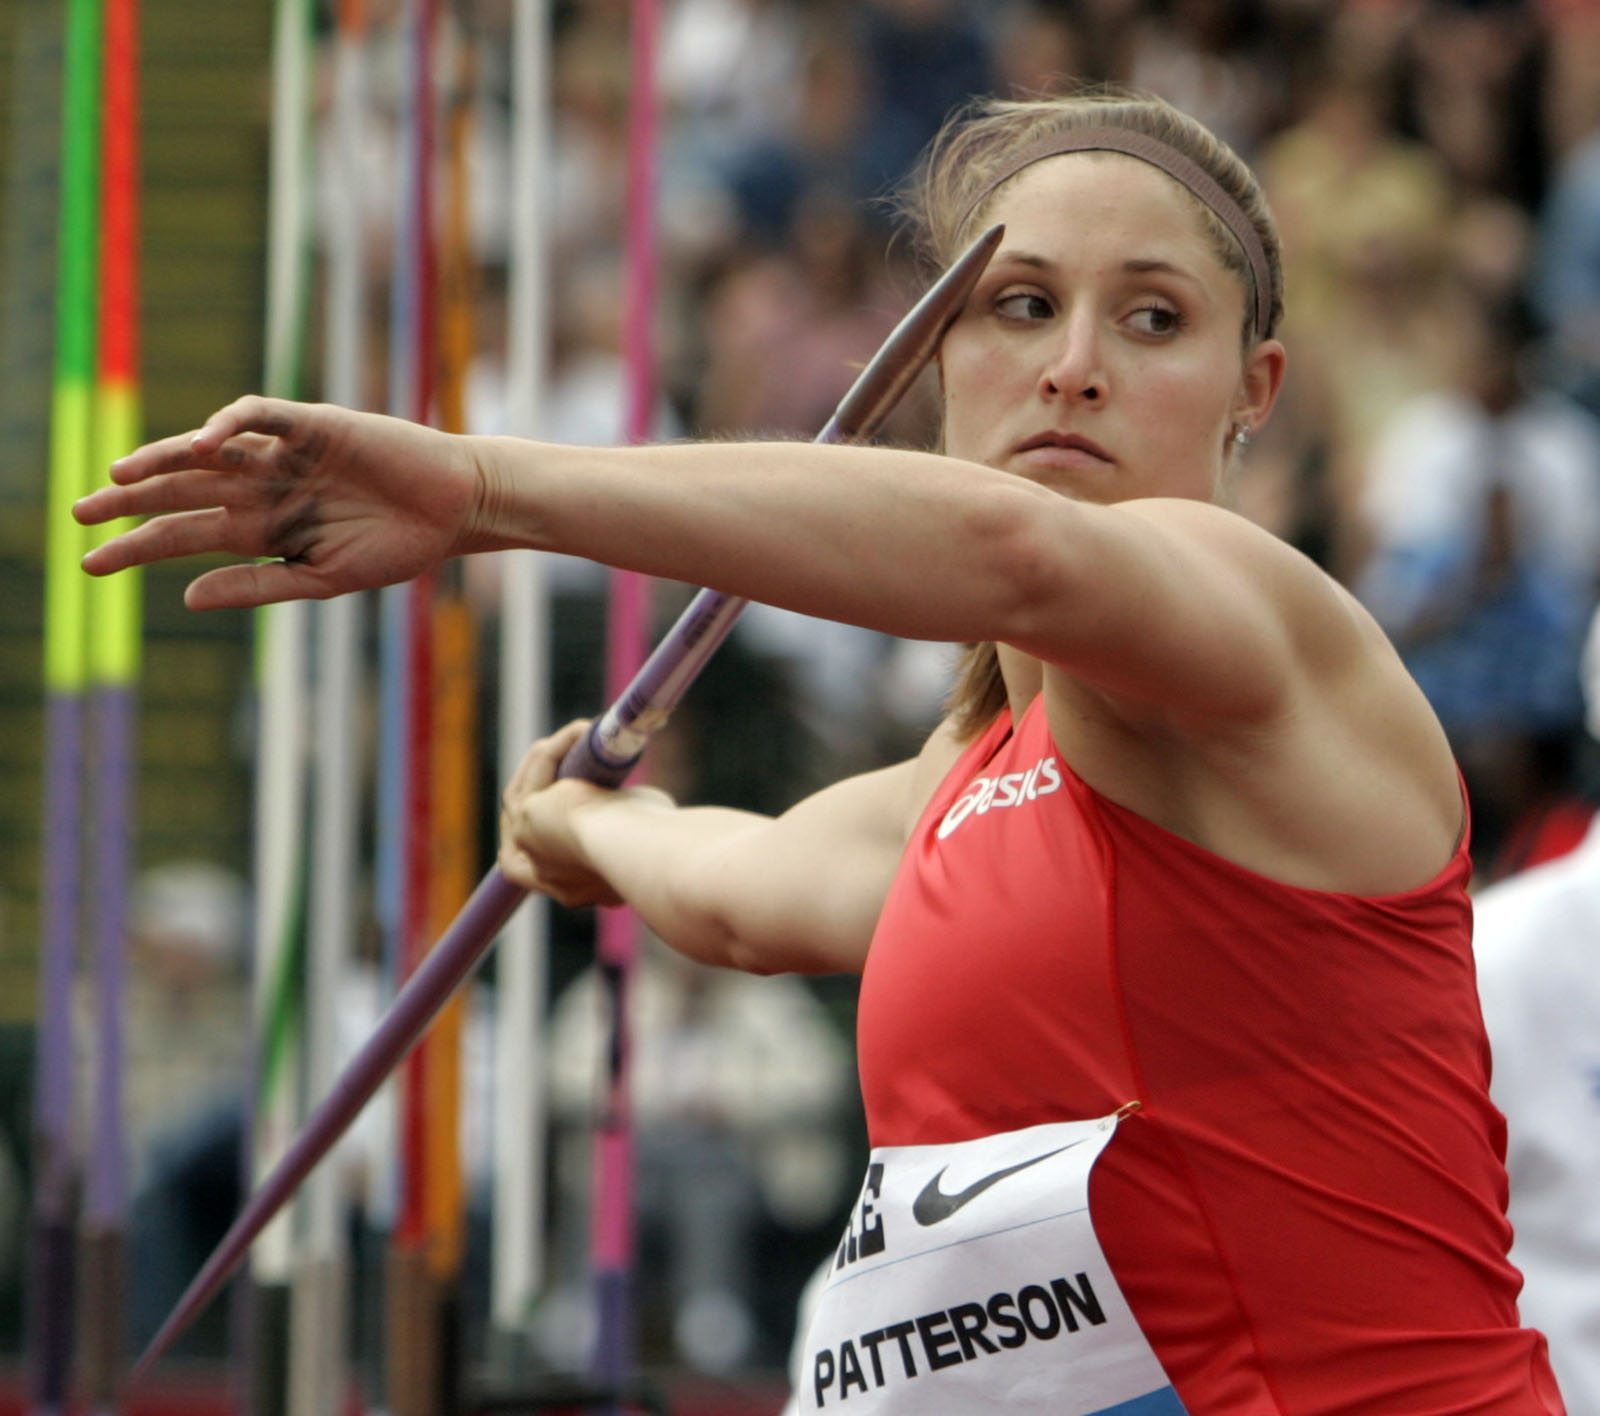 Kara Patterson throws the javelin at the Prefontaine Classic.